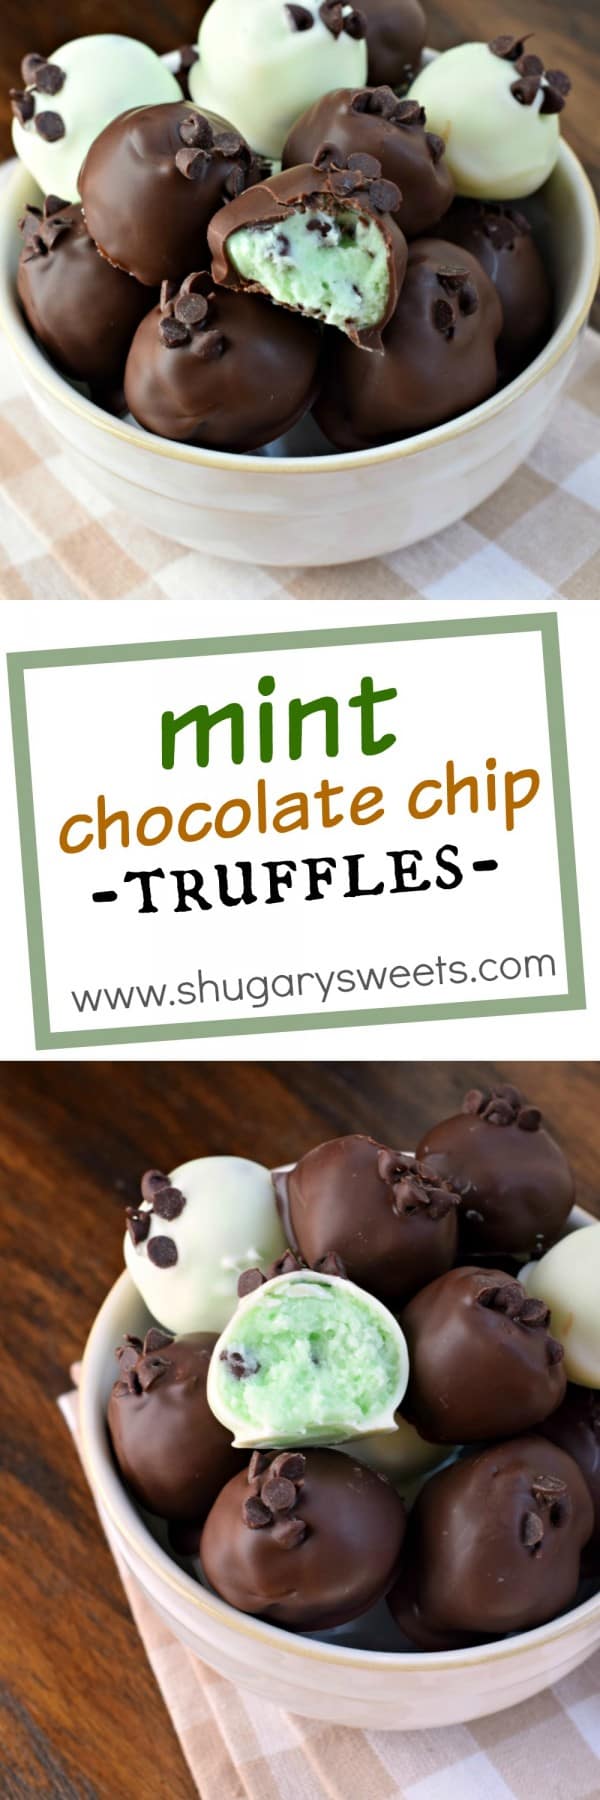 Delicious, creamy Mint Chocolate Chip Truffles recipe! So easy to make too!